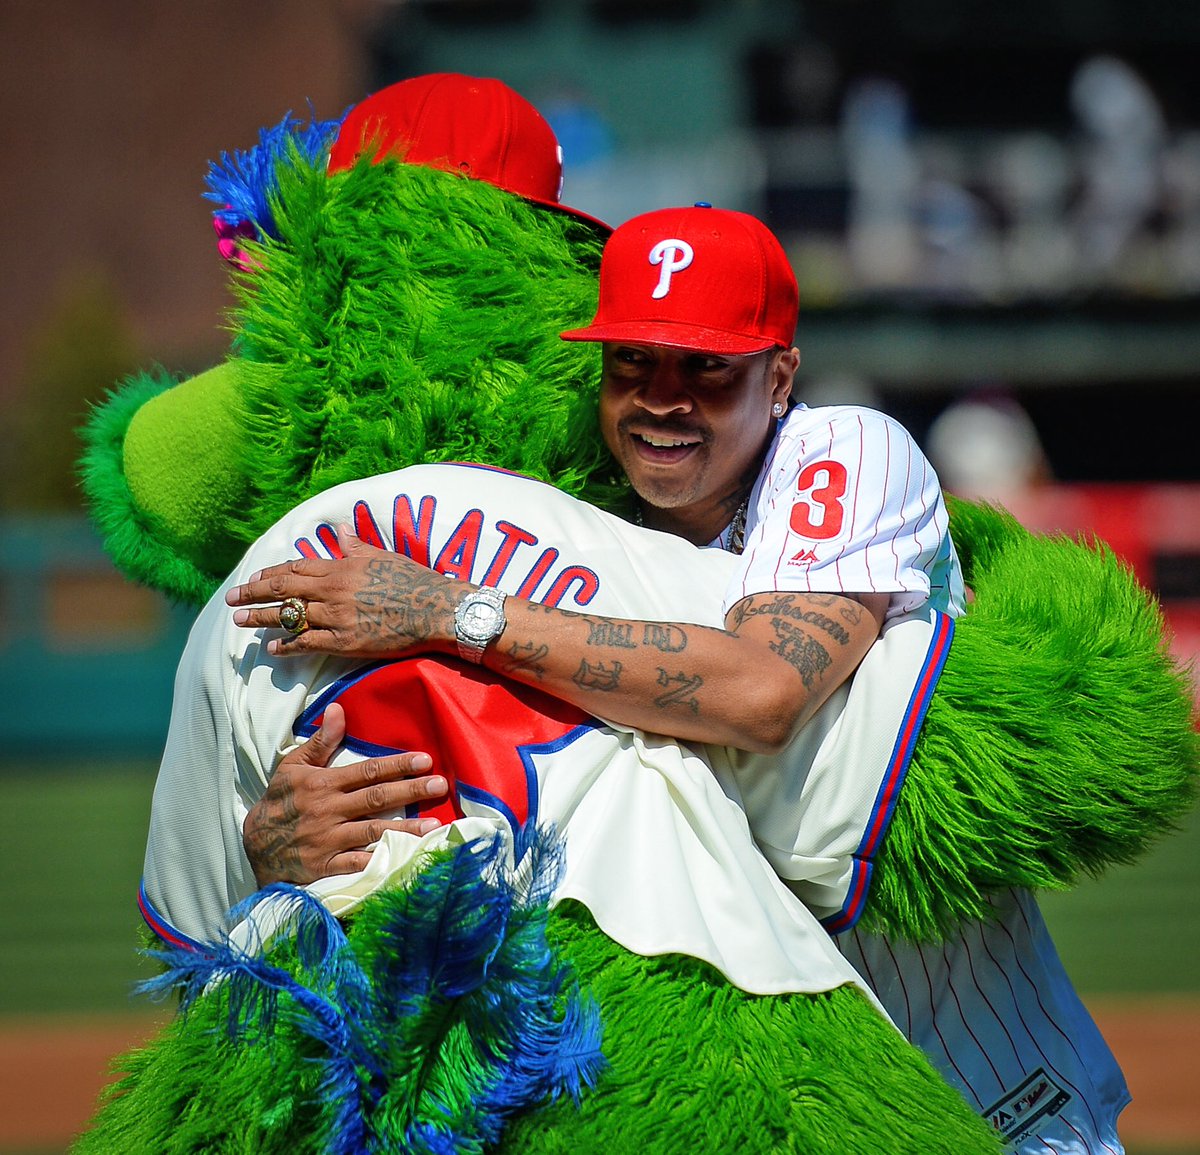 Allen Iverson Threw Out the First Pitch at Today's Phillies Game